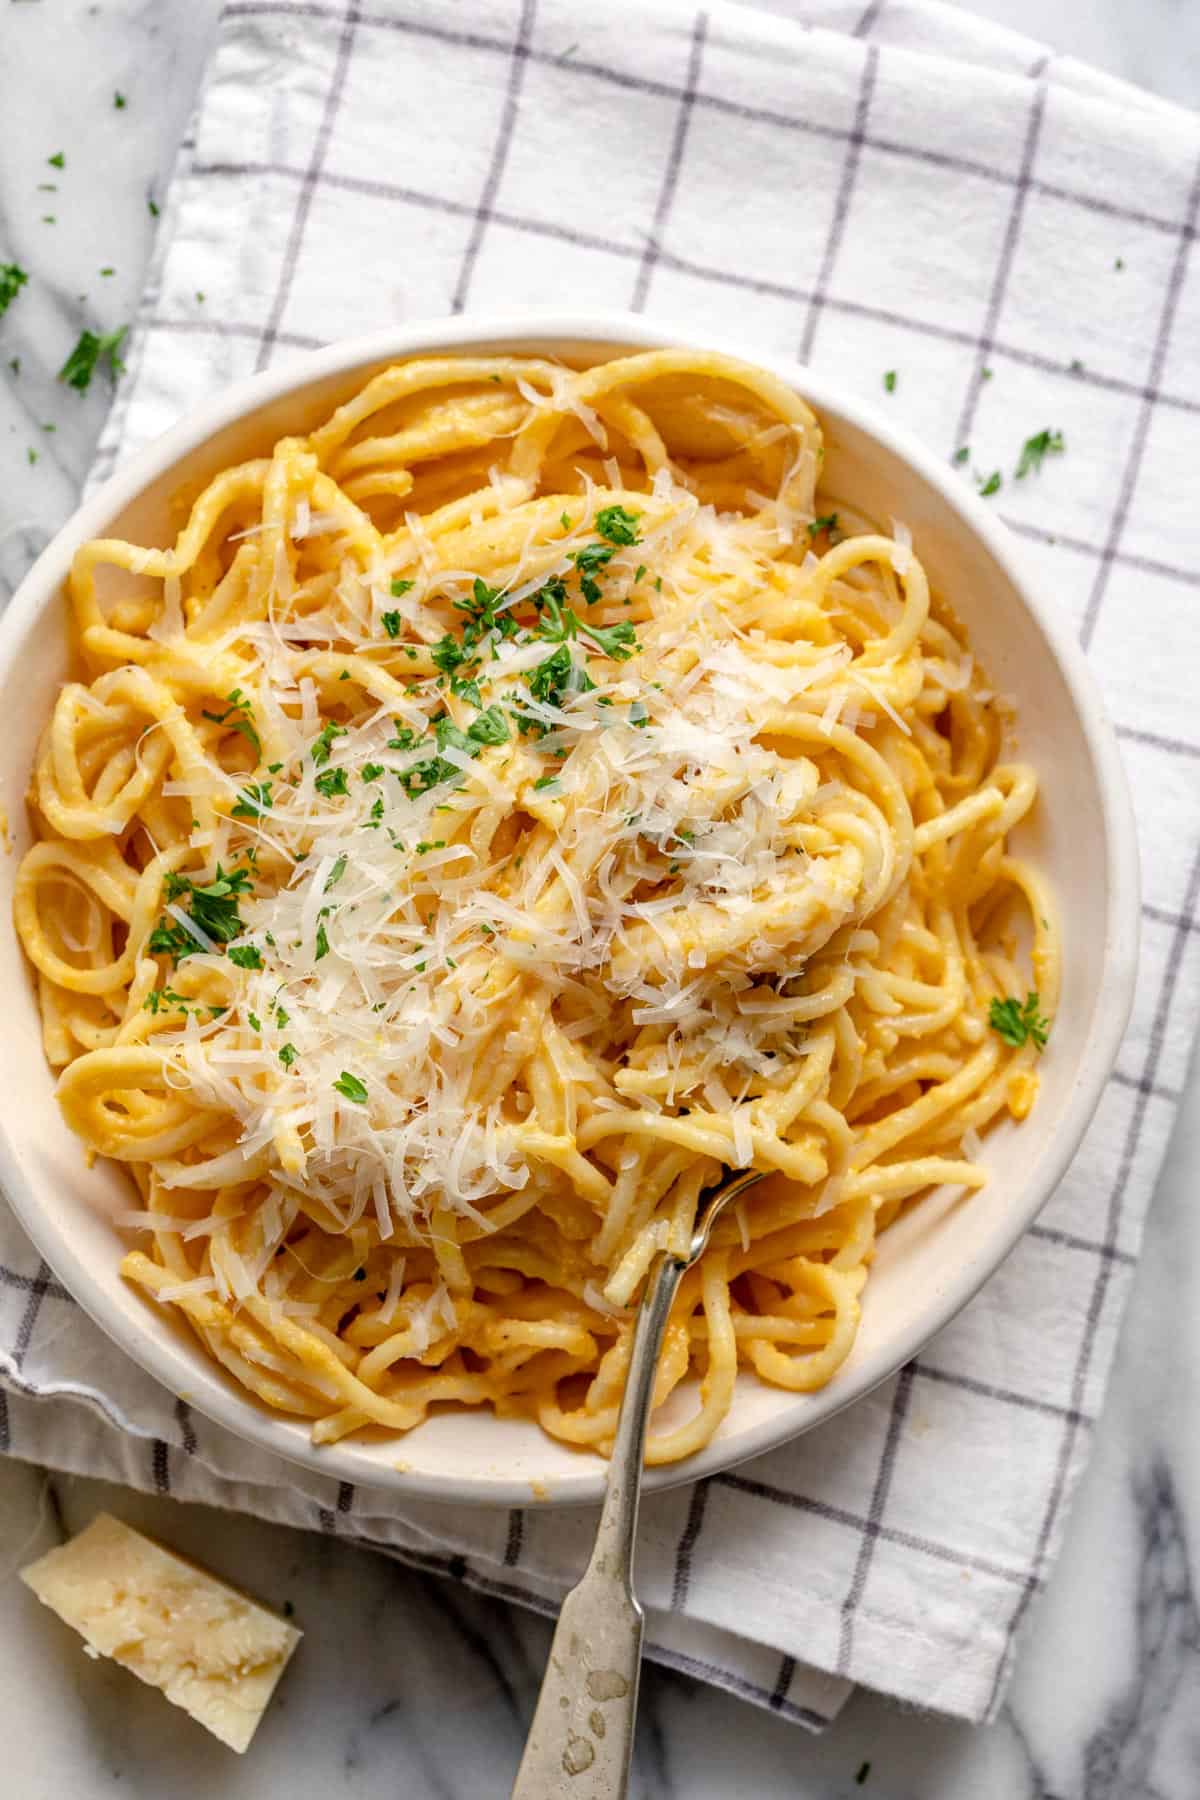 Butternut squash pasta with parmesan cheese